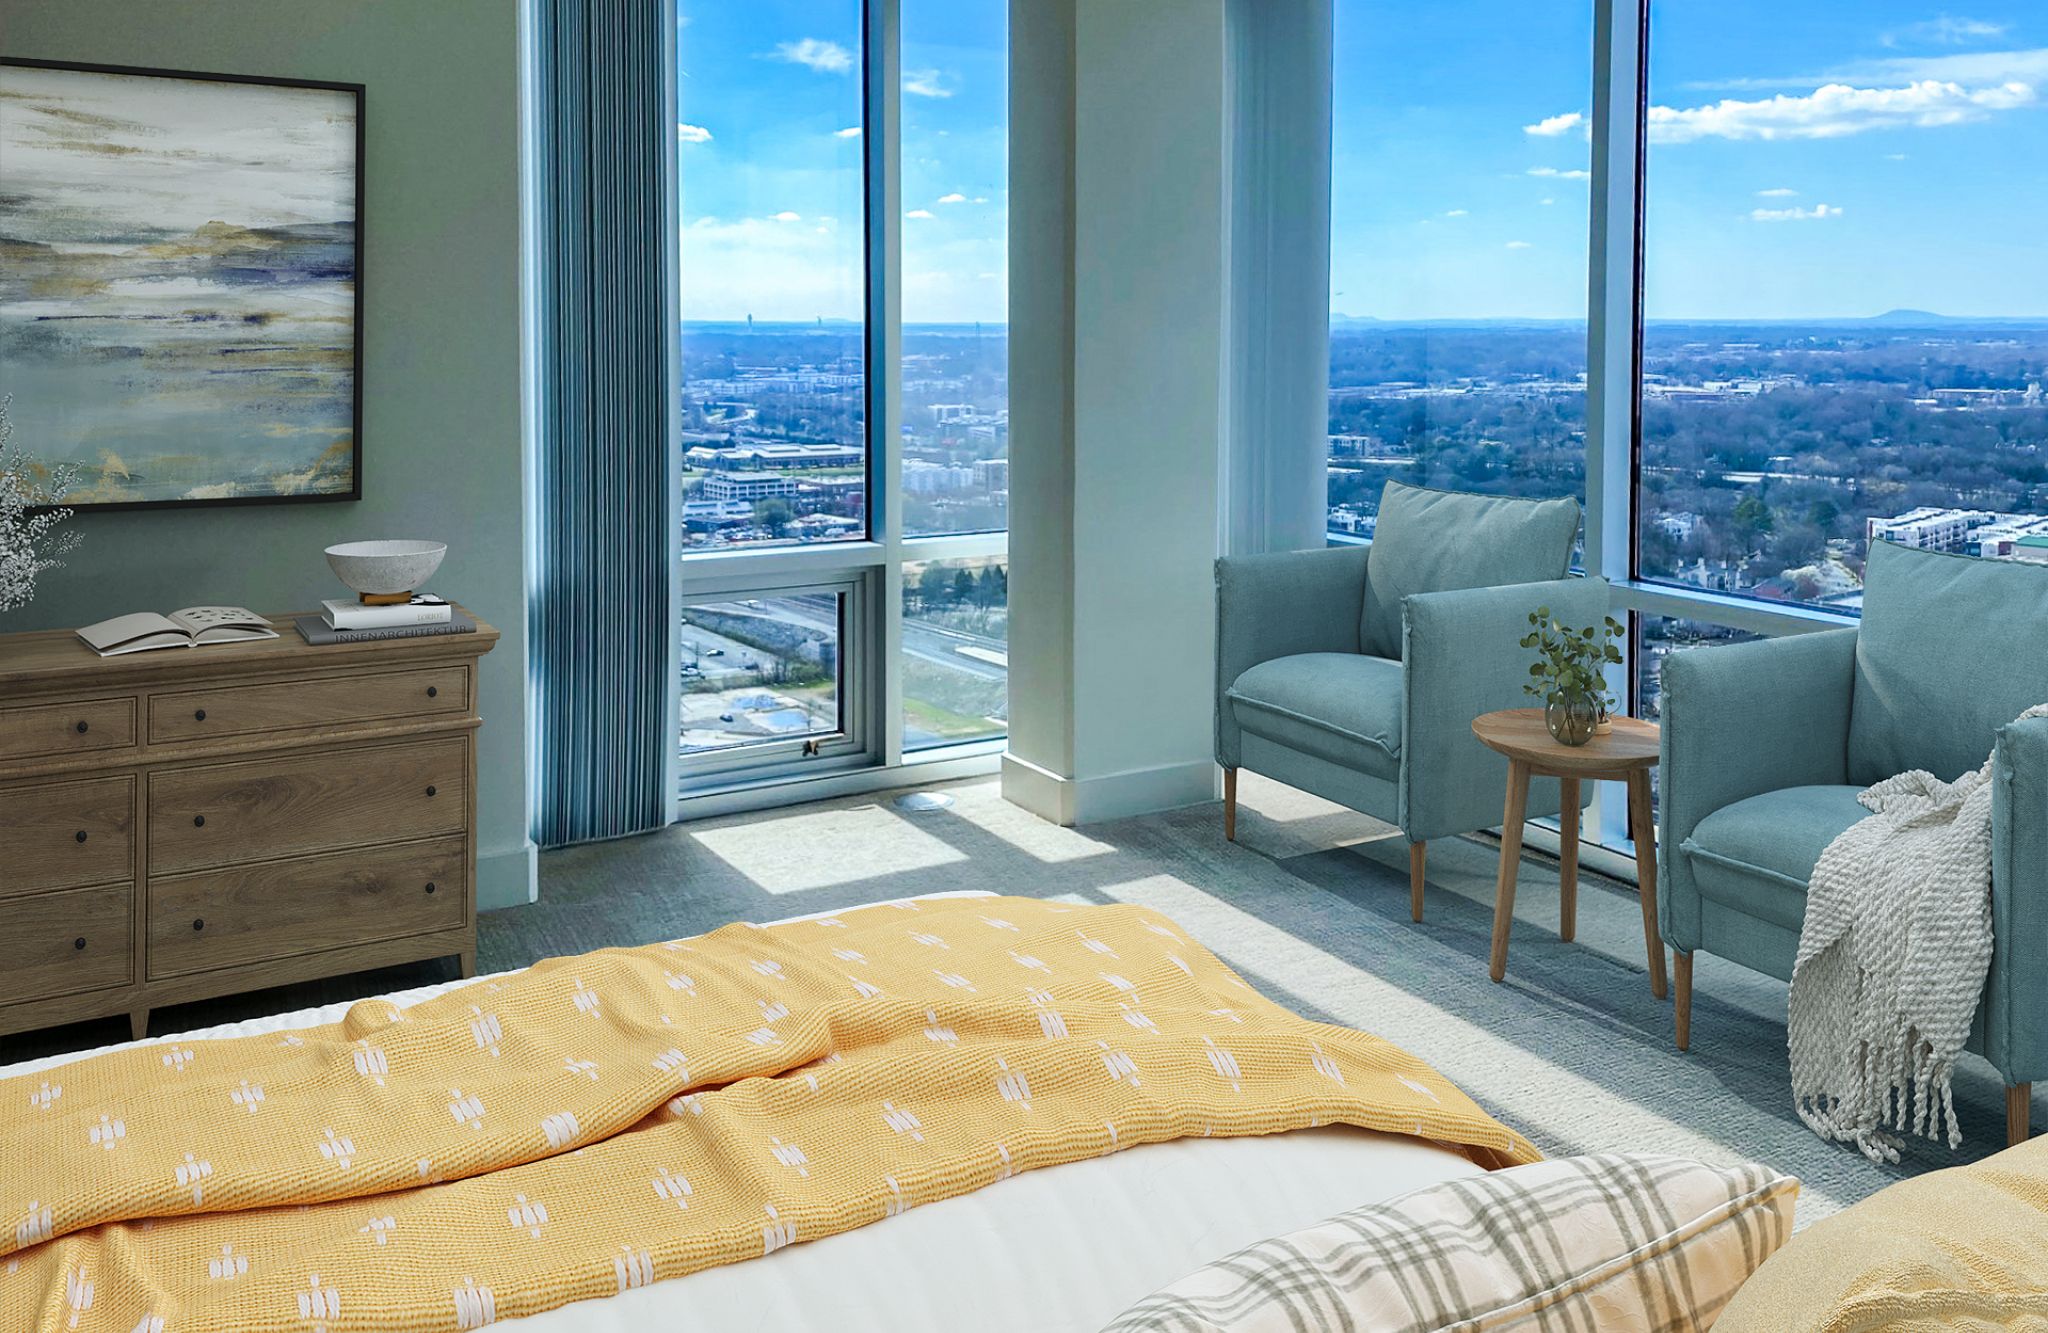 The Vue Charlotte apartment interior with 12'6" ceilings and floor-to-ceiling windows overlooking city